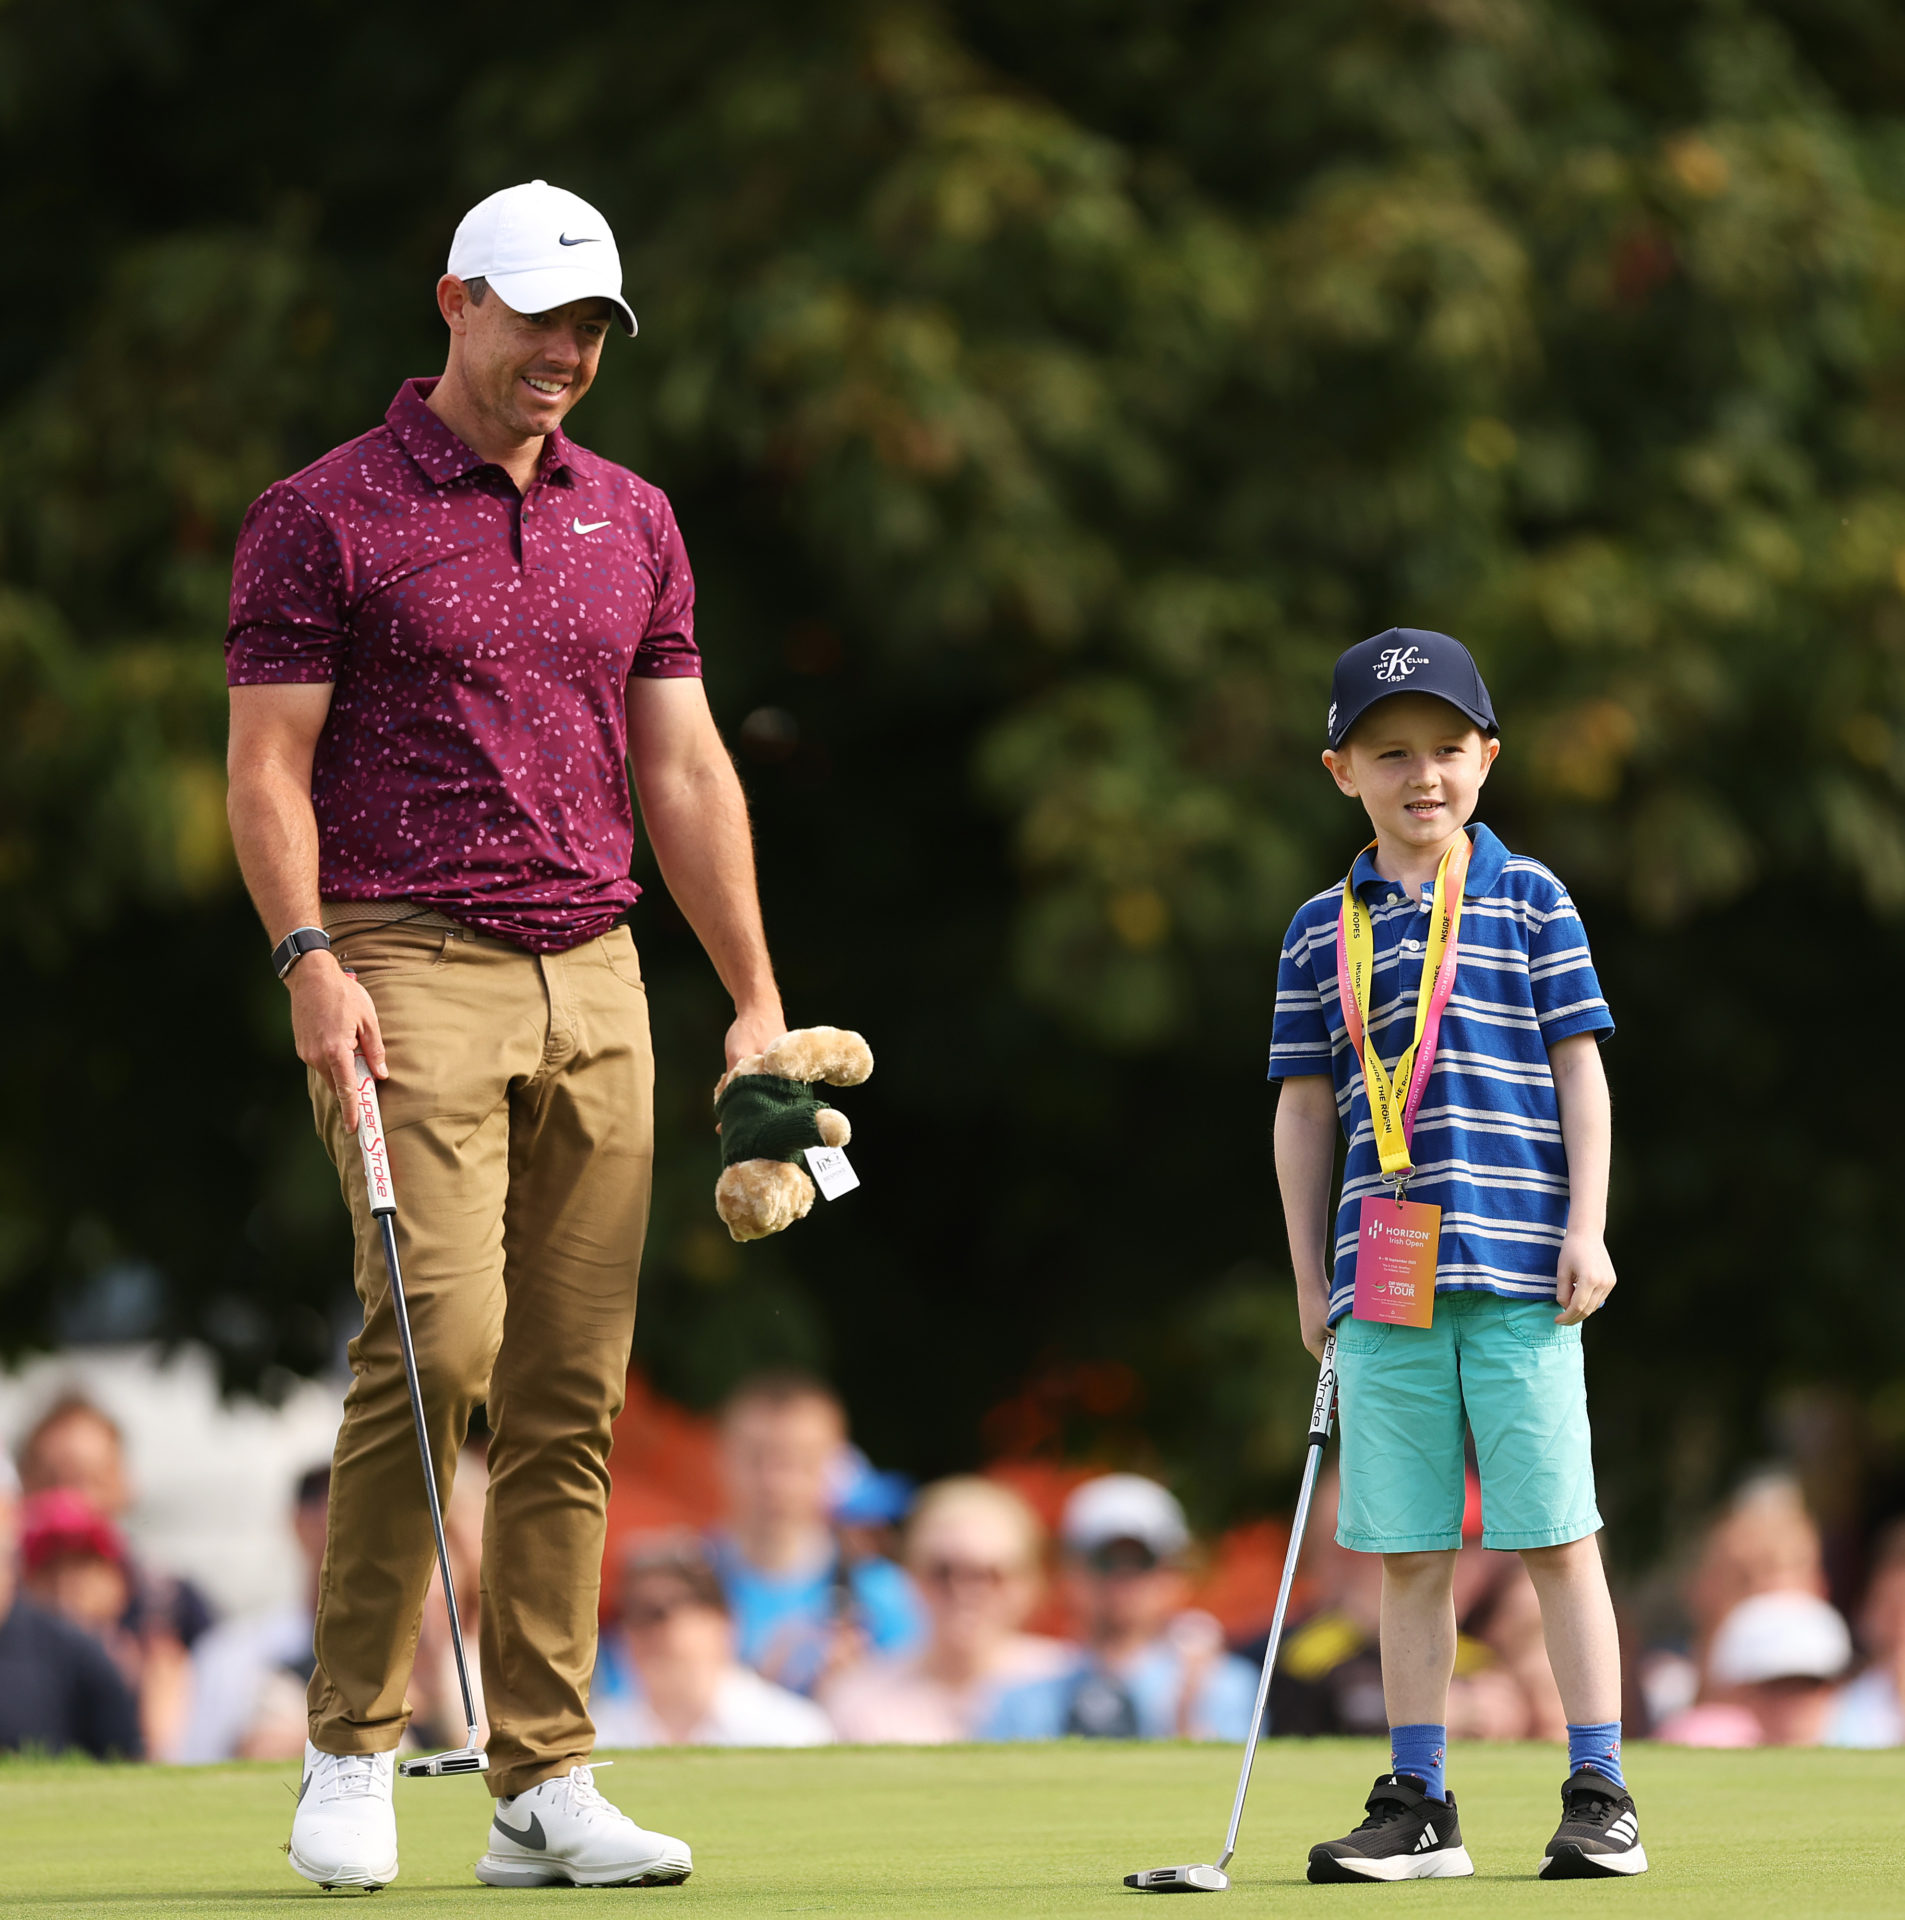 Rory McIlroy with Michael Horgan during the Pro-Am prior to the Horizon Irish Open at The K Club